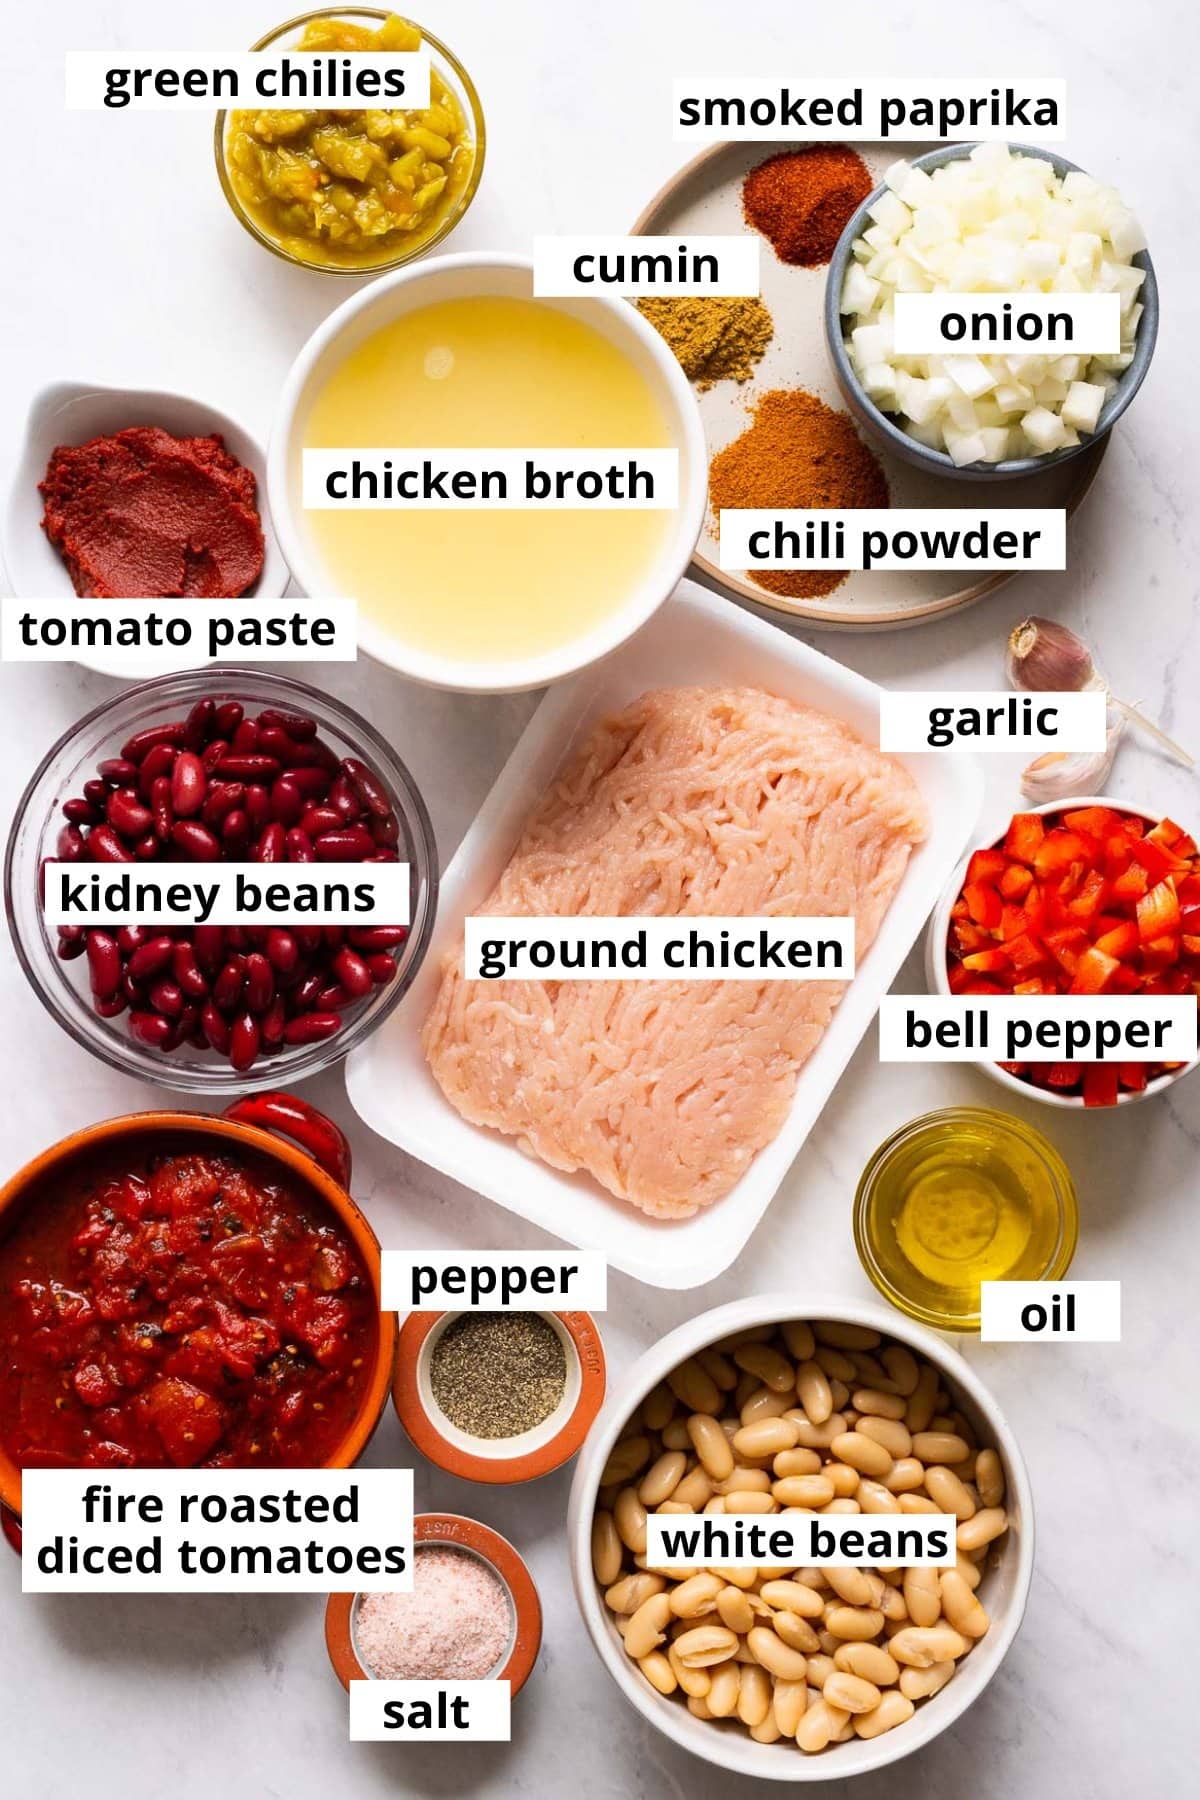 Ground chicken, onion, kidney beans, white beans, fire roasted tomatoes, bell pepper, garlic, tomato paste, green chilies, chicken broth, smoked paprika, cumin, chili powder, salt, pepper, oil.